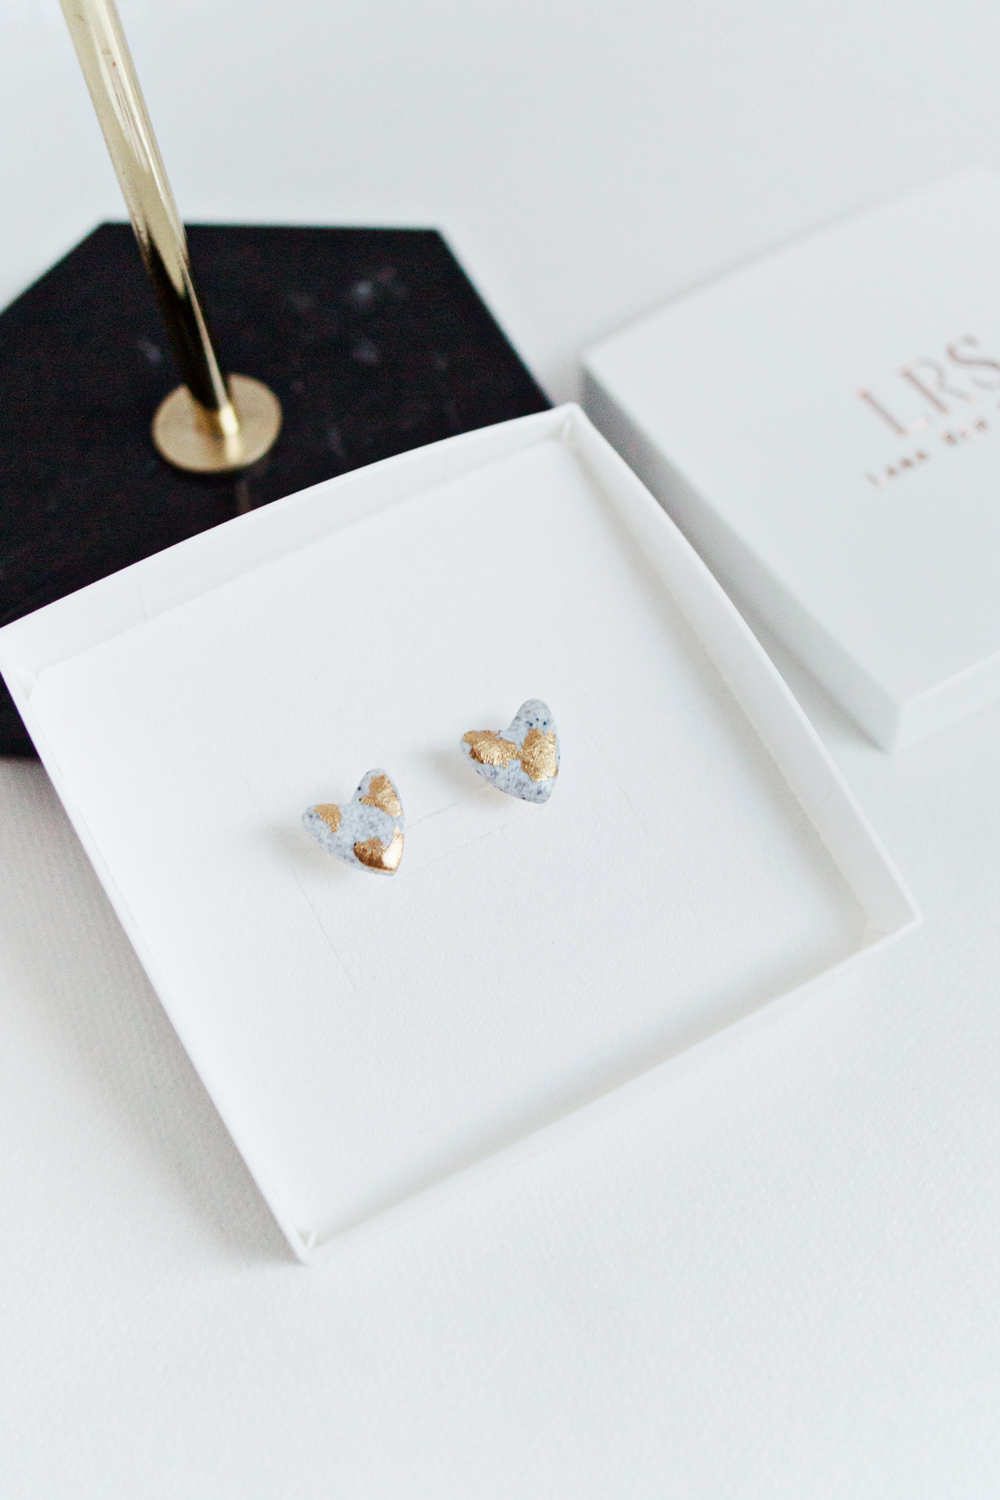 Hexagonal stud earrings in a granite style with gold leaf